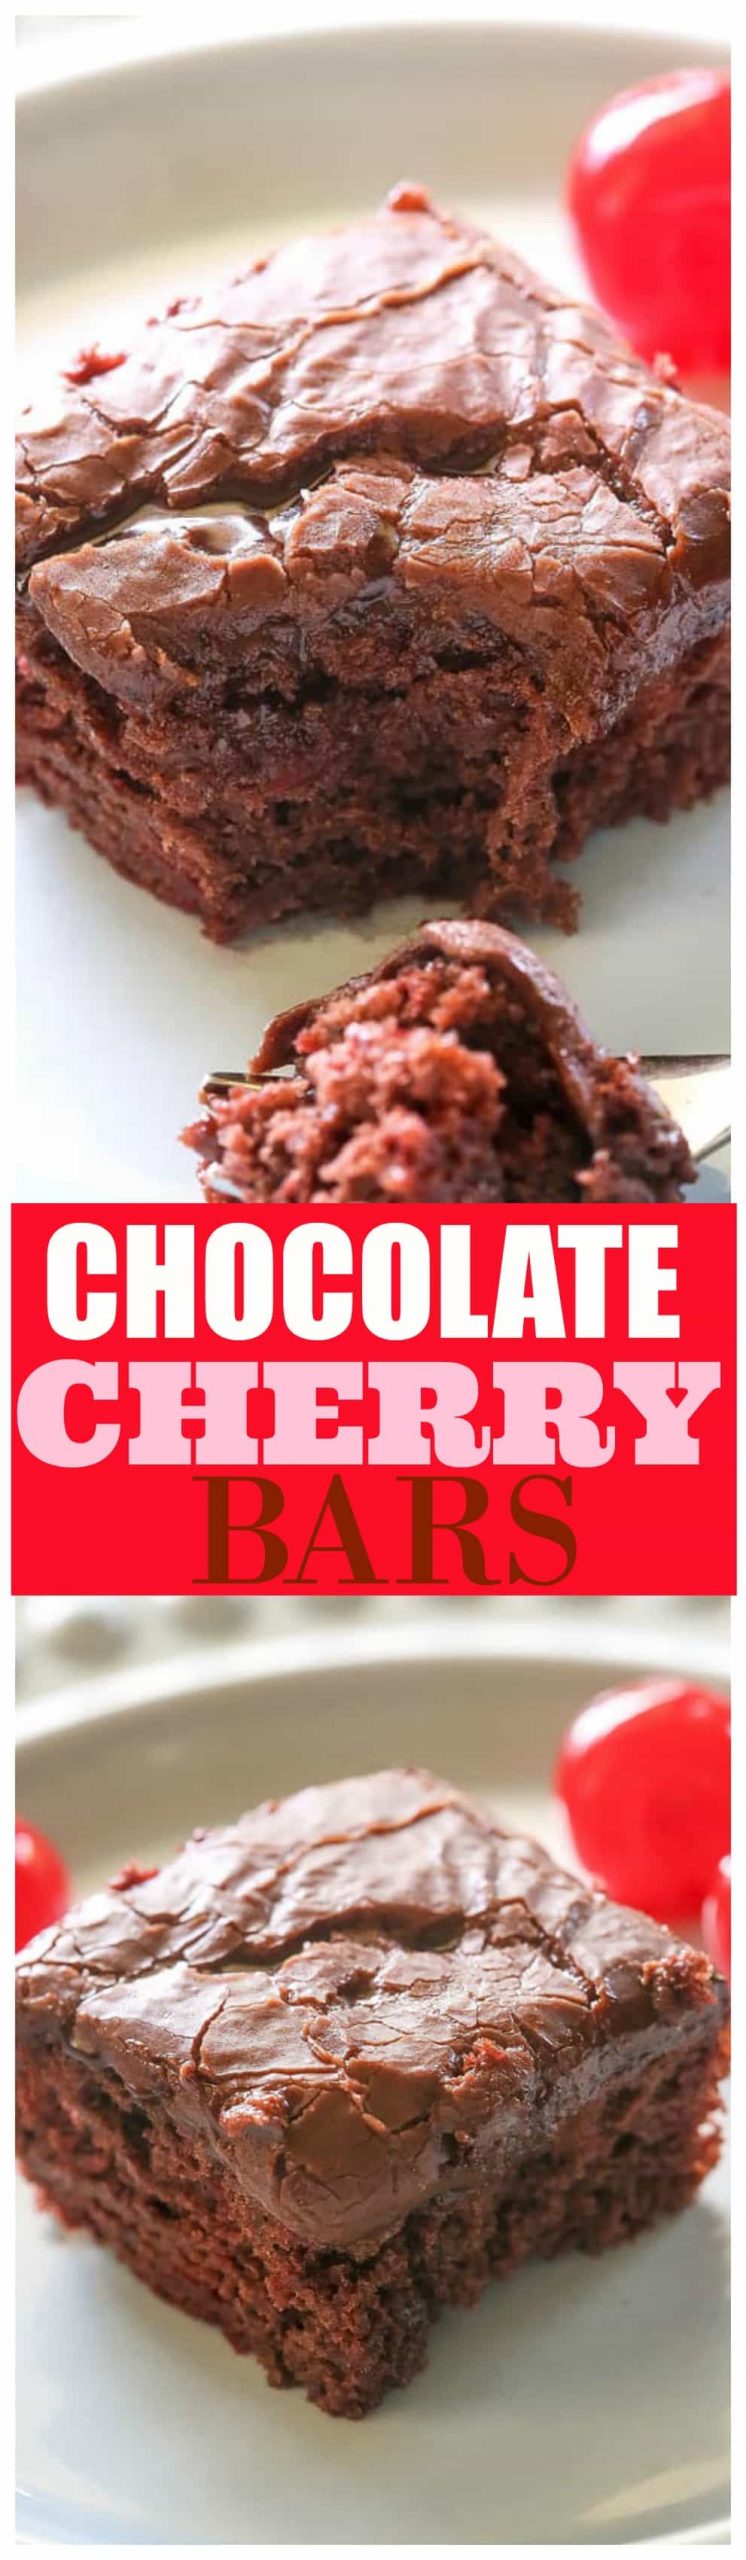 Chocolate Cherry Bars - so easy and a great potluck dessert. #chocolate #cherry #bars #dessert #recipe